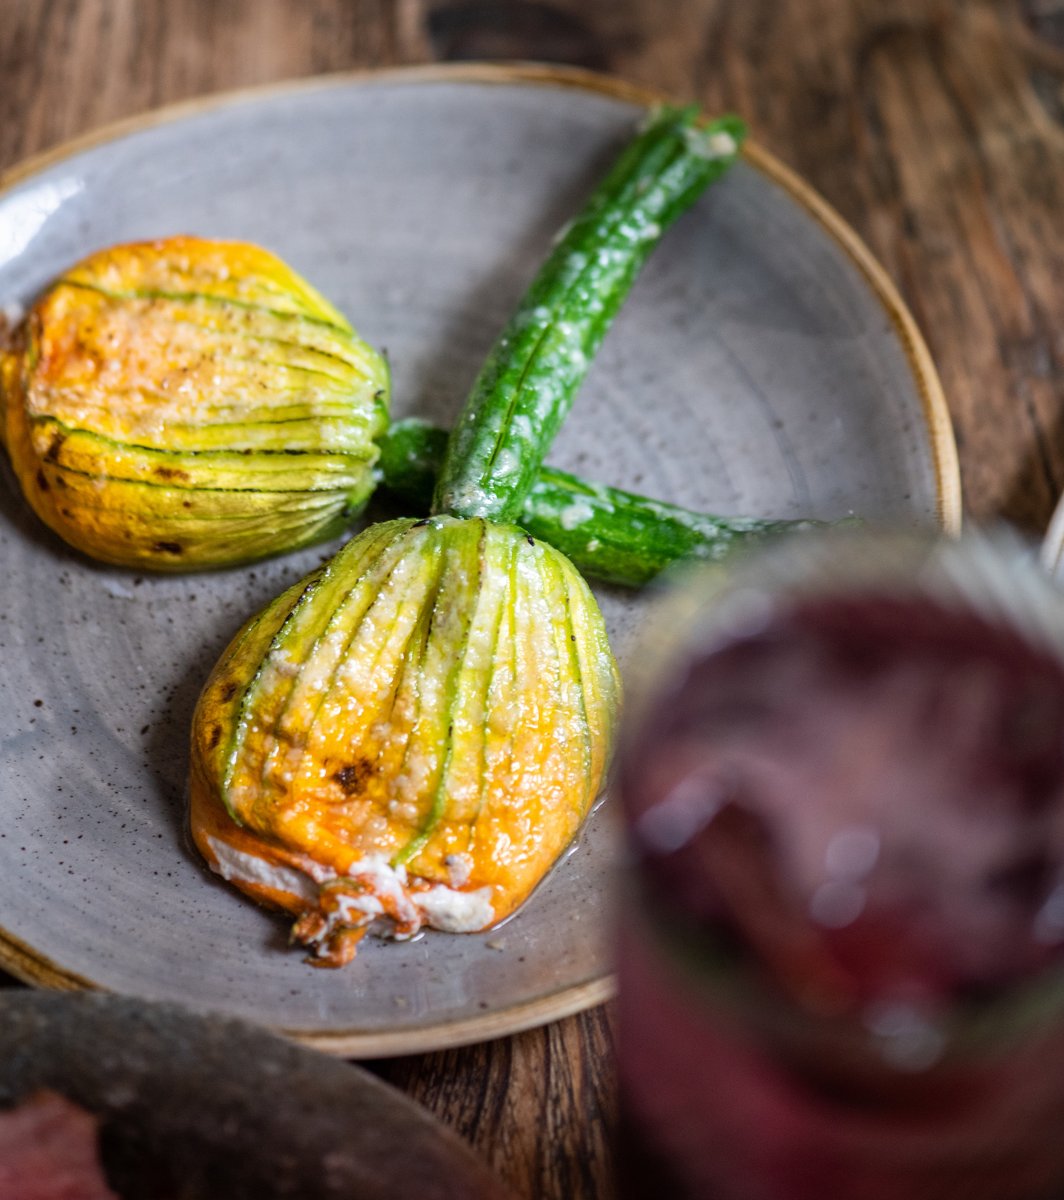 Trombetta Zucchine, stuffed and lightly fried, now on the menu at @lagocciacoventgarden. We are open 11:30am to 7pm tomorrow, and until 10:30pm today, so join us this Bank Holiday weekend out in the courtyard. Visit our website or give us a call on 020 7305 7676 to book.